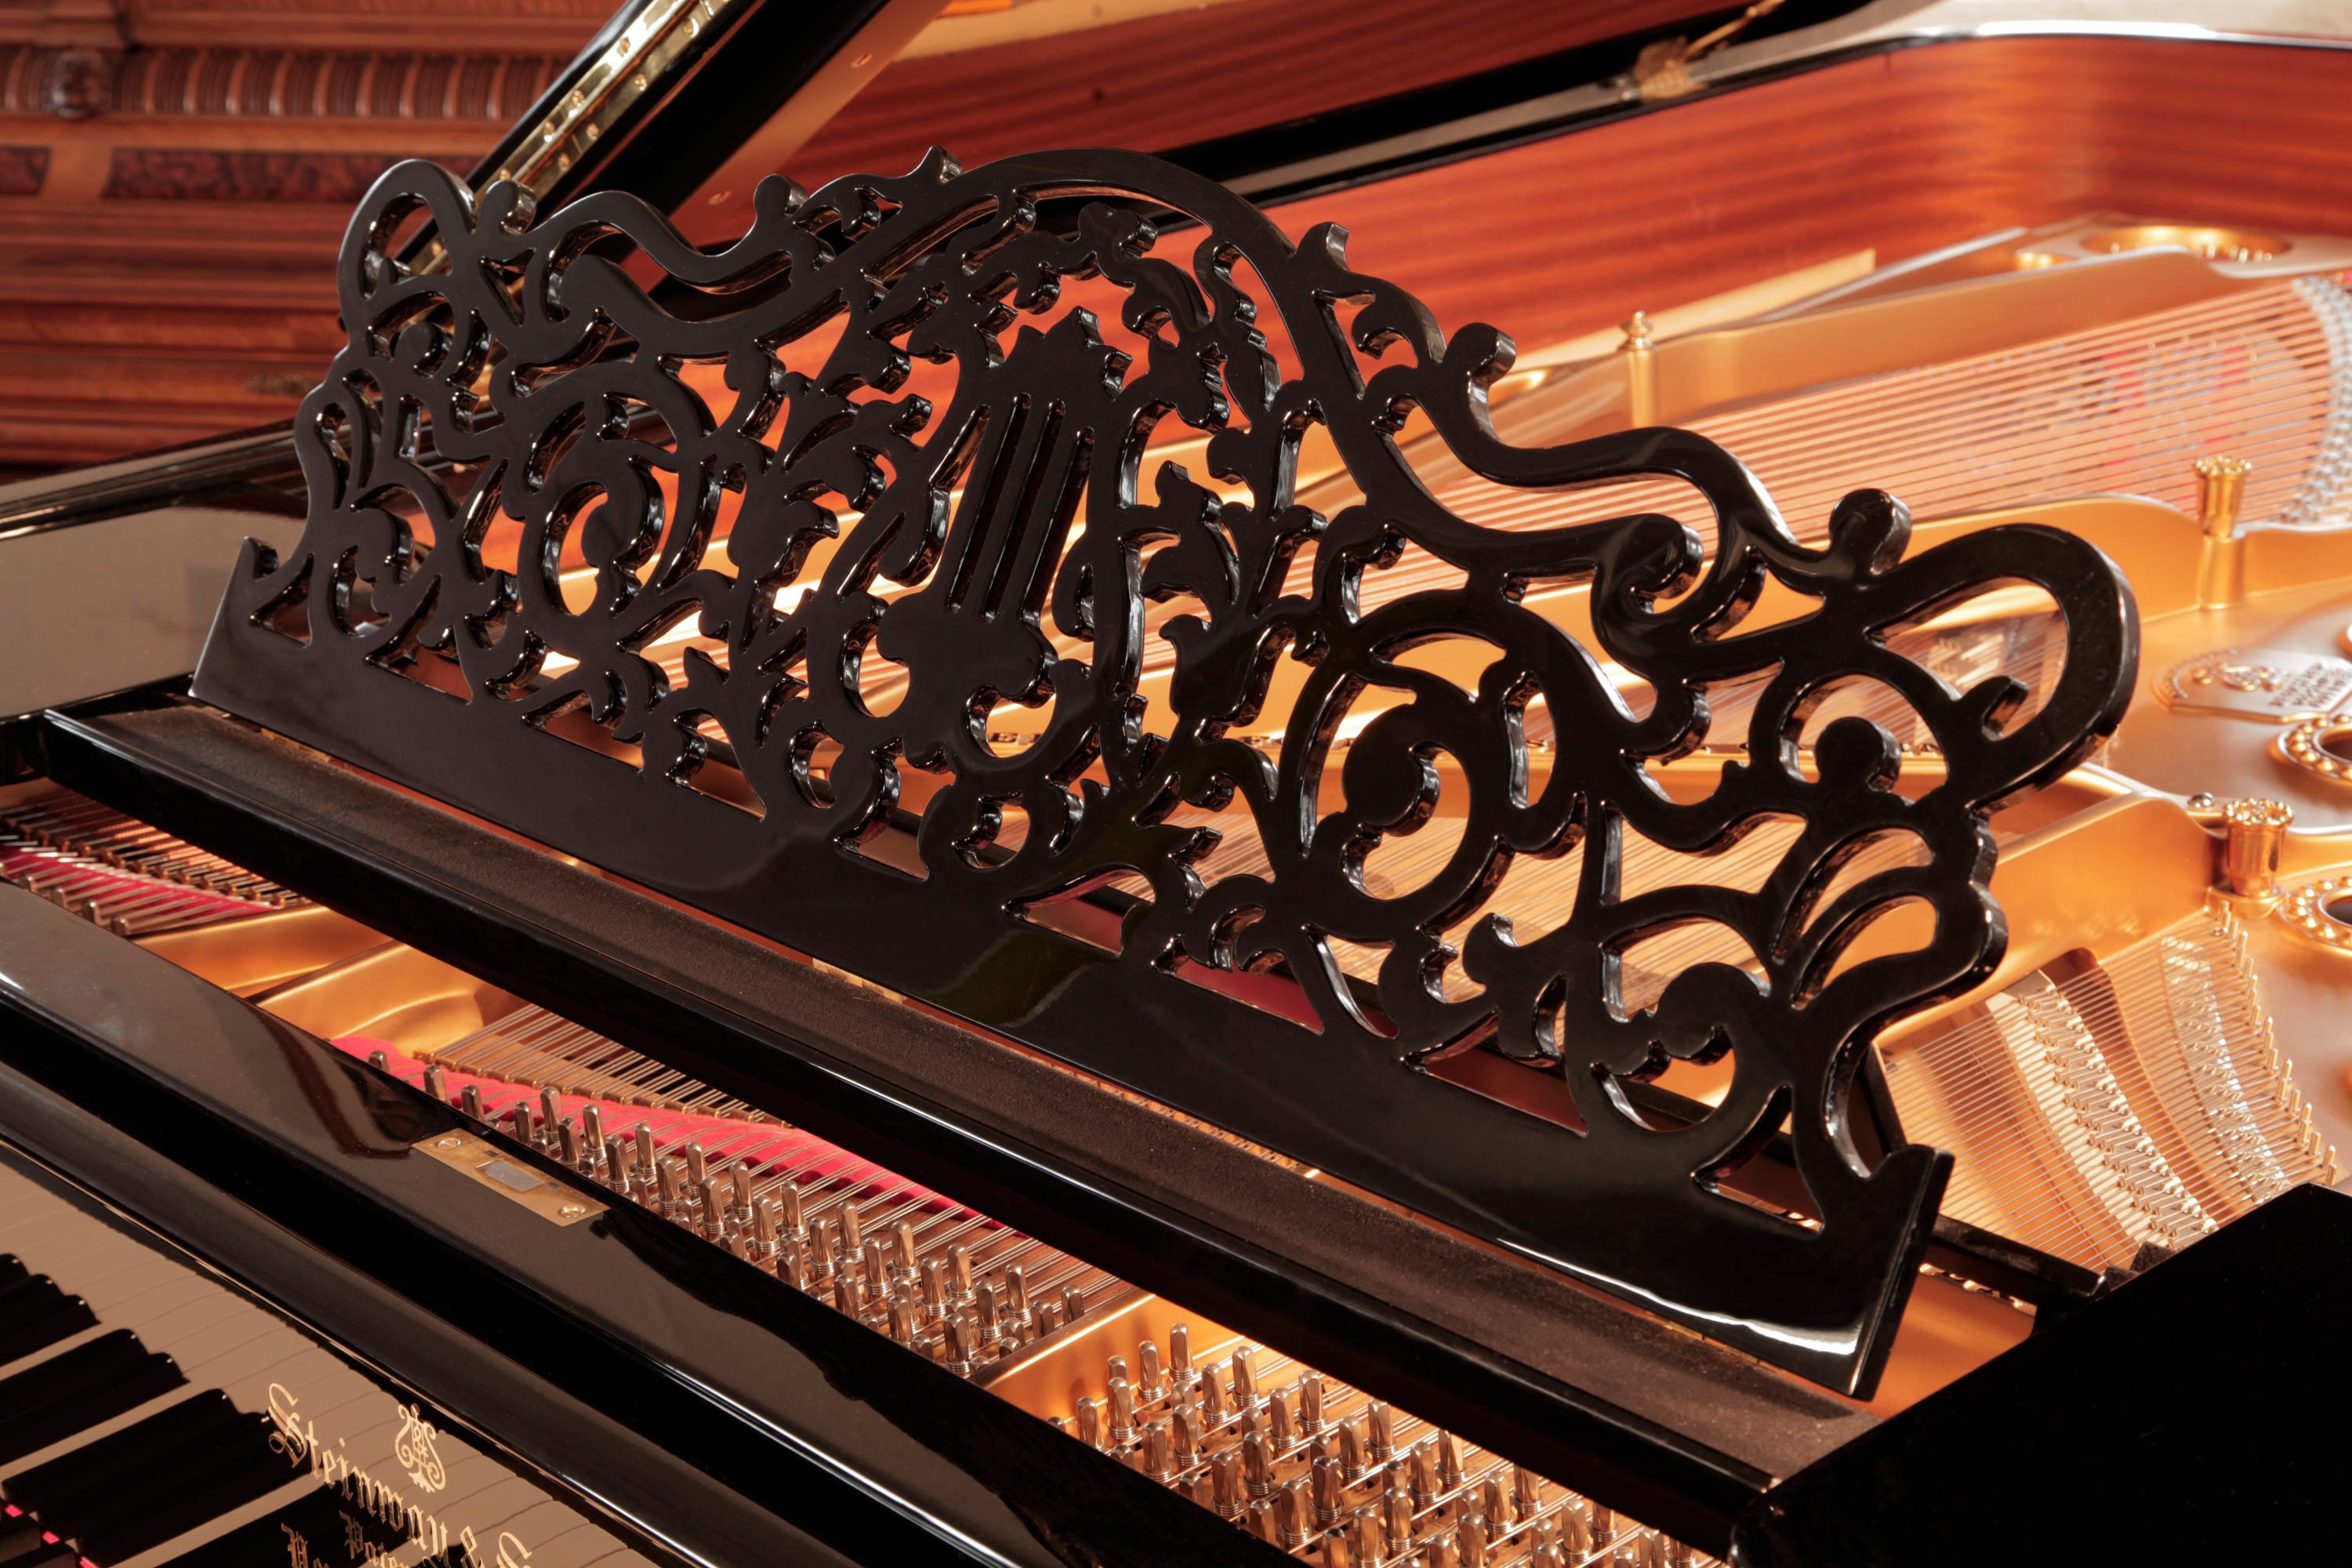 Rebuilt, 1886, Steinway Model B grand piano with a black case.
The music desk is in an openwork arabesque design featuring a central lyre motif 
surrounded by stylised tendrils and foliage. The serpentine piano cheek features a dual linear case